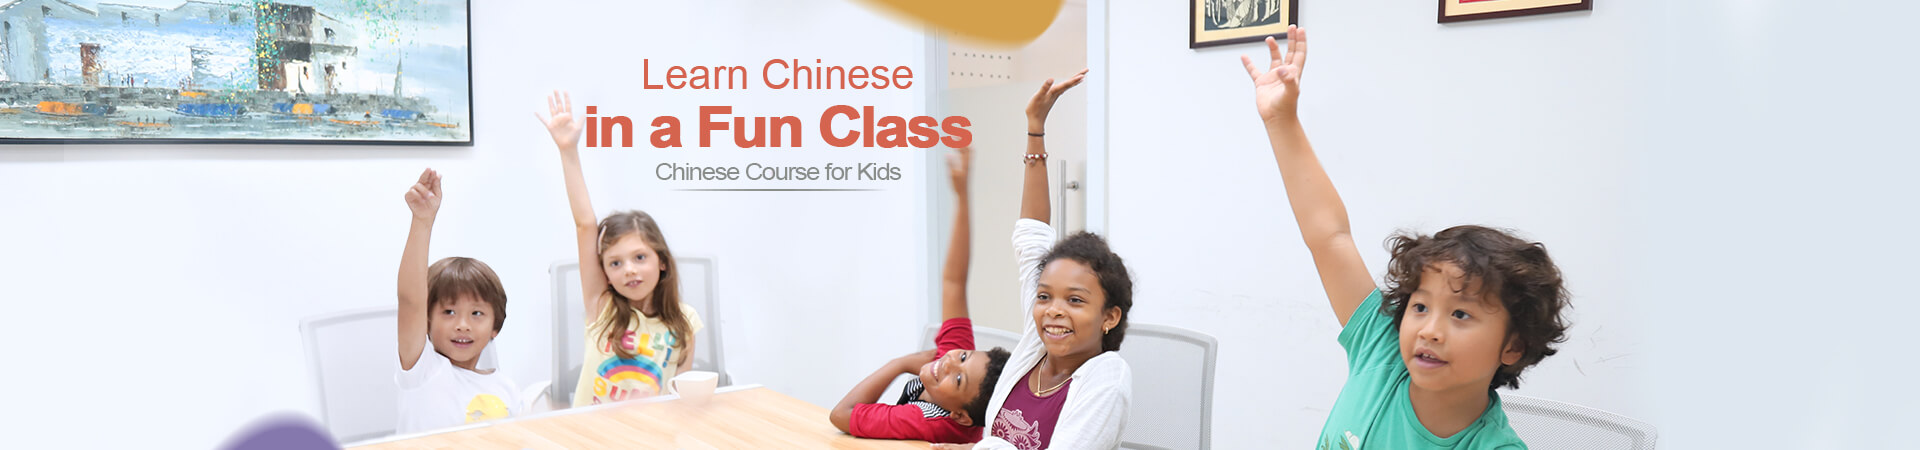 chinese-course-for-children-banner